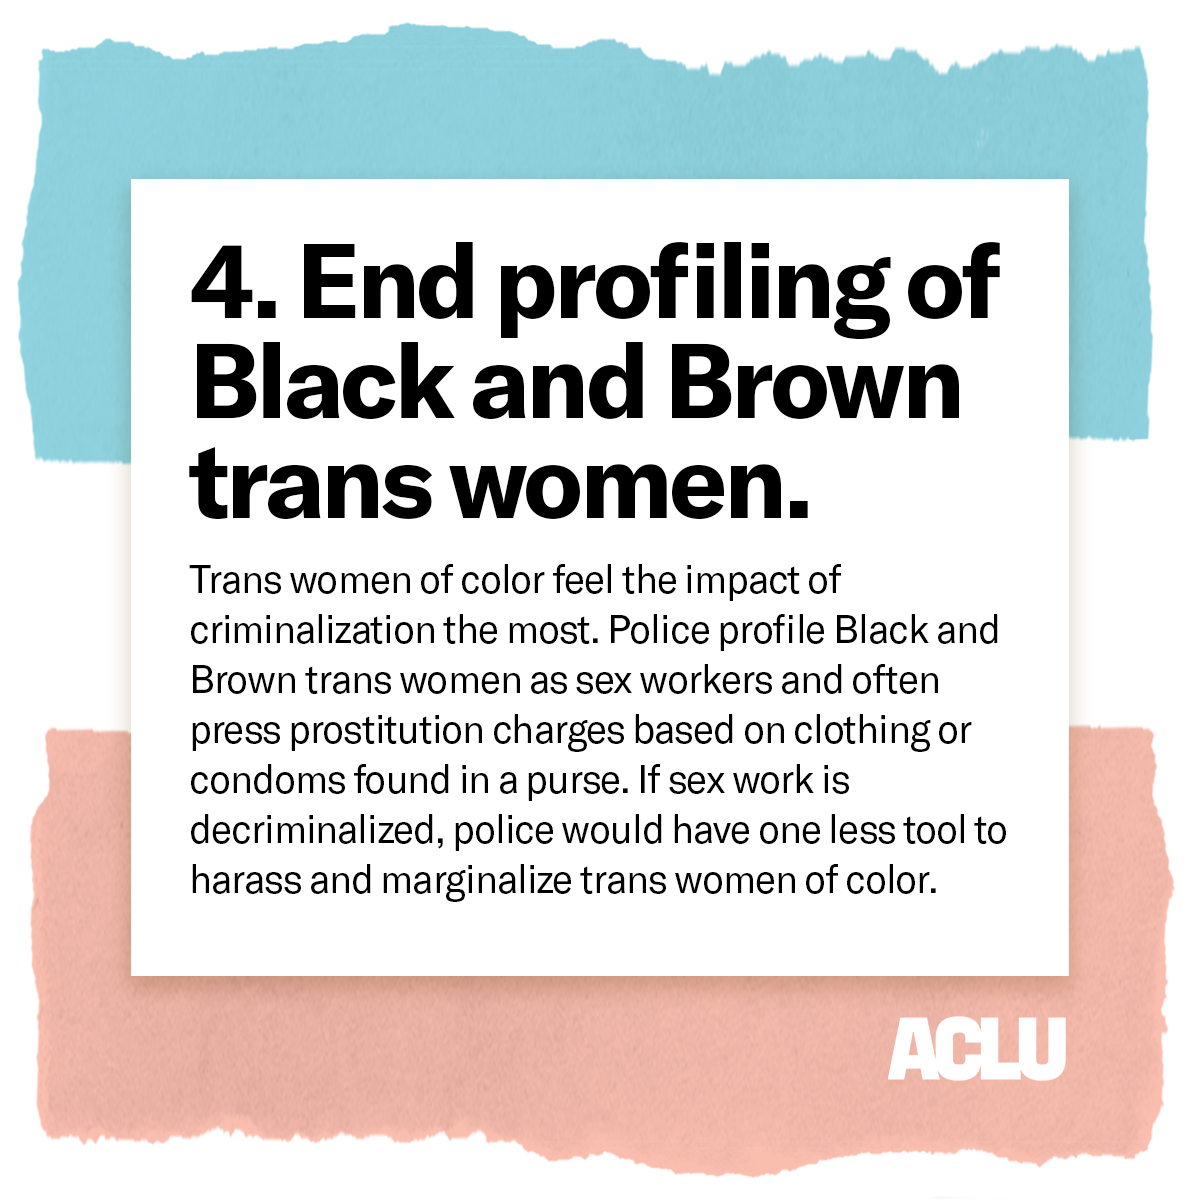 Decriminalizing sex work helps end law enforcement profiling and targeting of trans women of color.